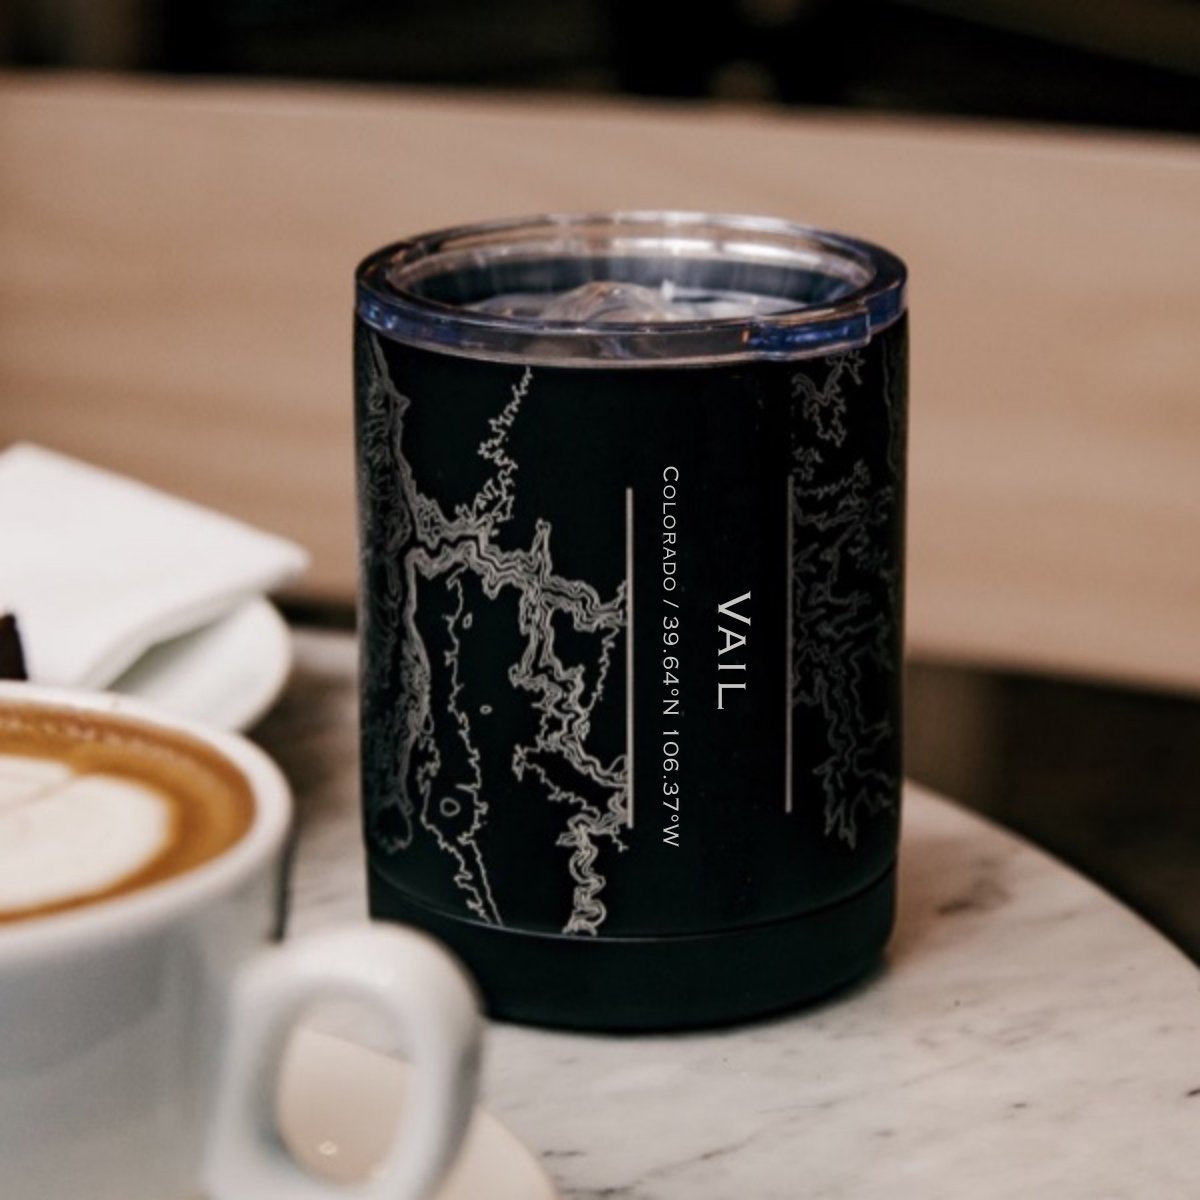 Vail - Colorado Map Insulated Cup in Matte Black | Cyan Castor